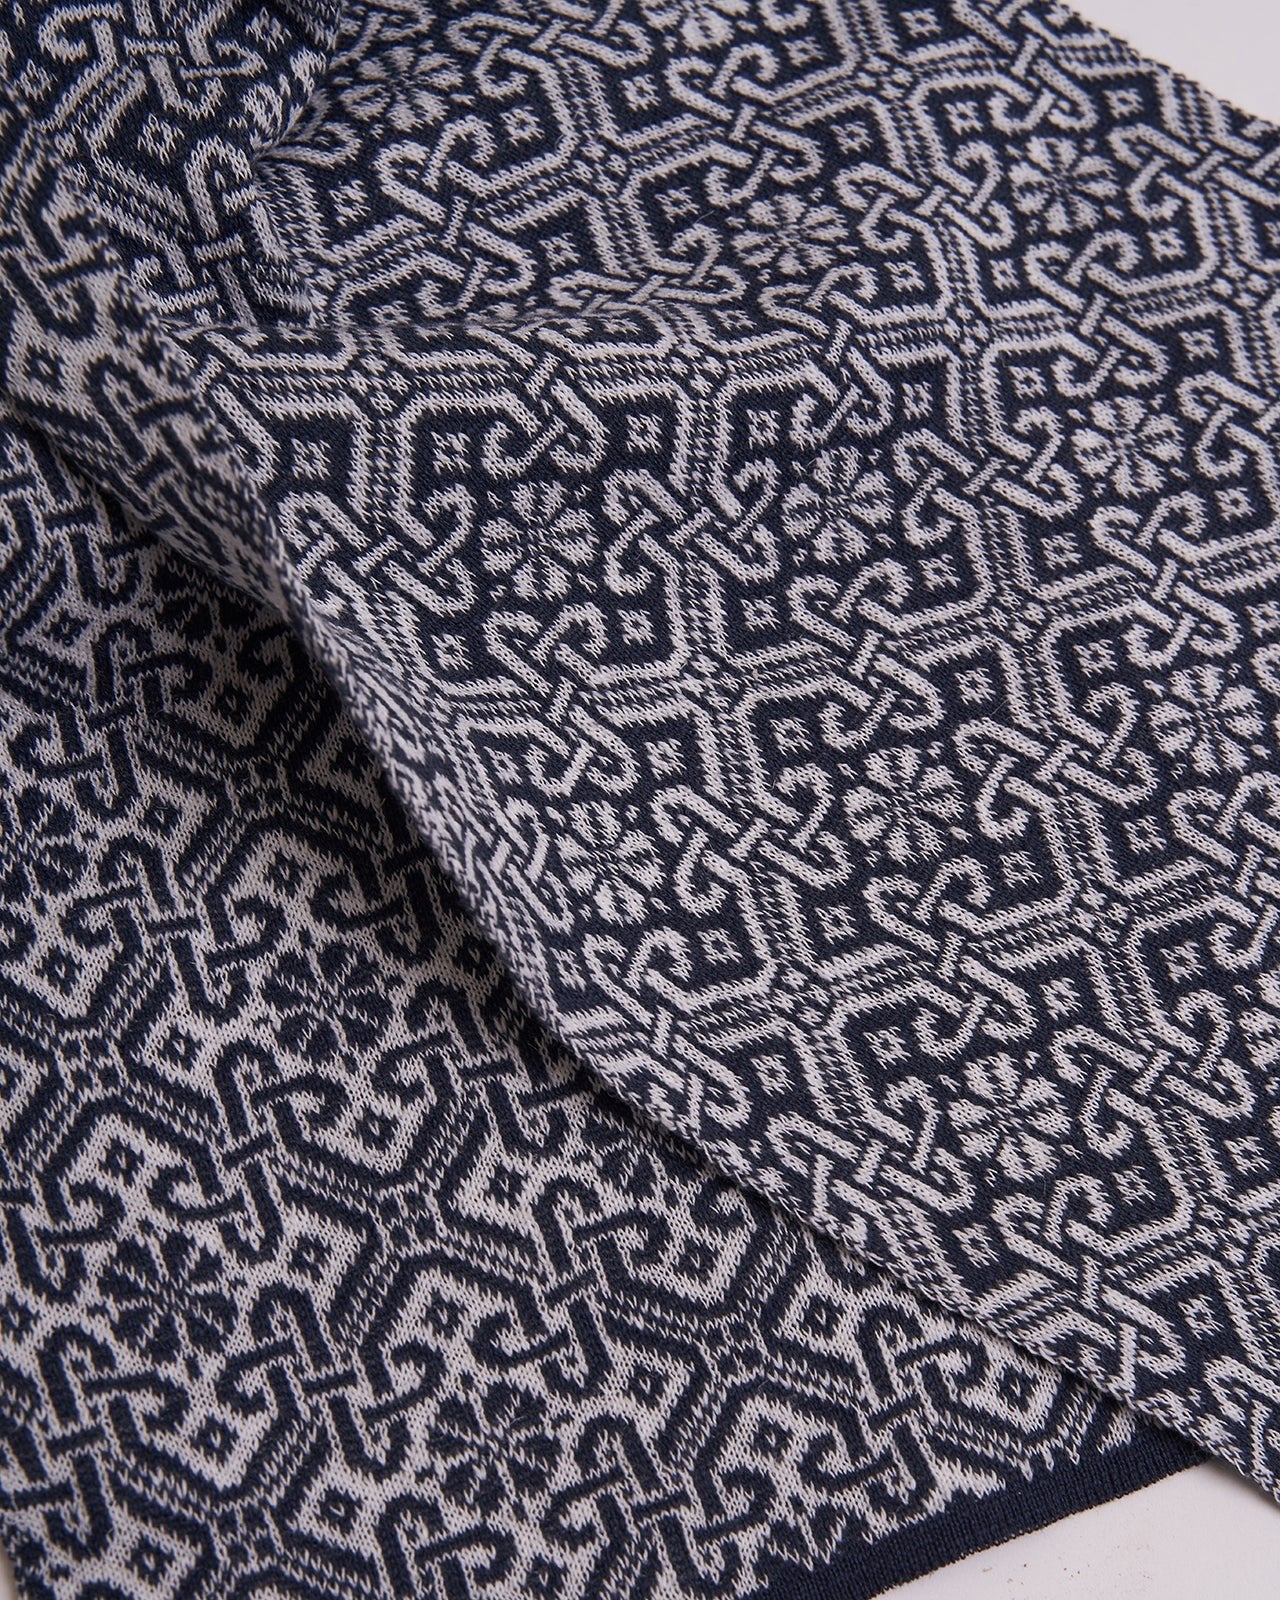 elegant navy blue scarf with a detailed brown geometric pattern and solid brown edges, displayed on a white background, showcasing the intricate design and sophisticated style